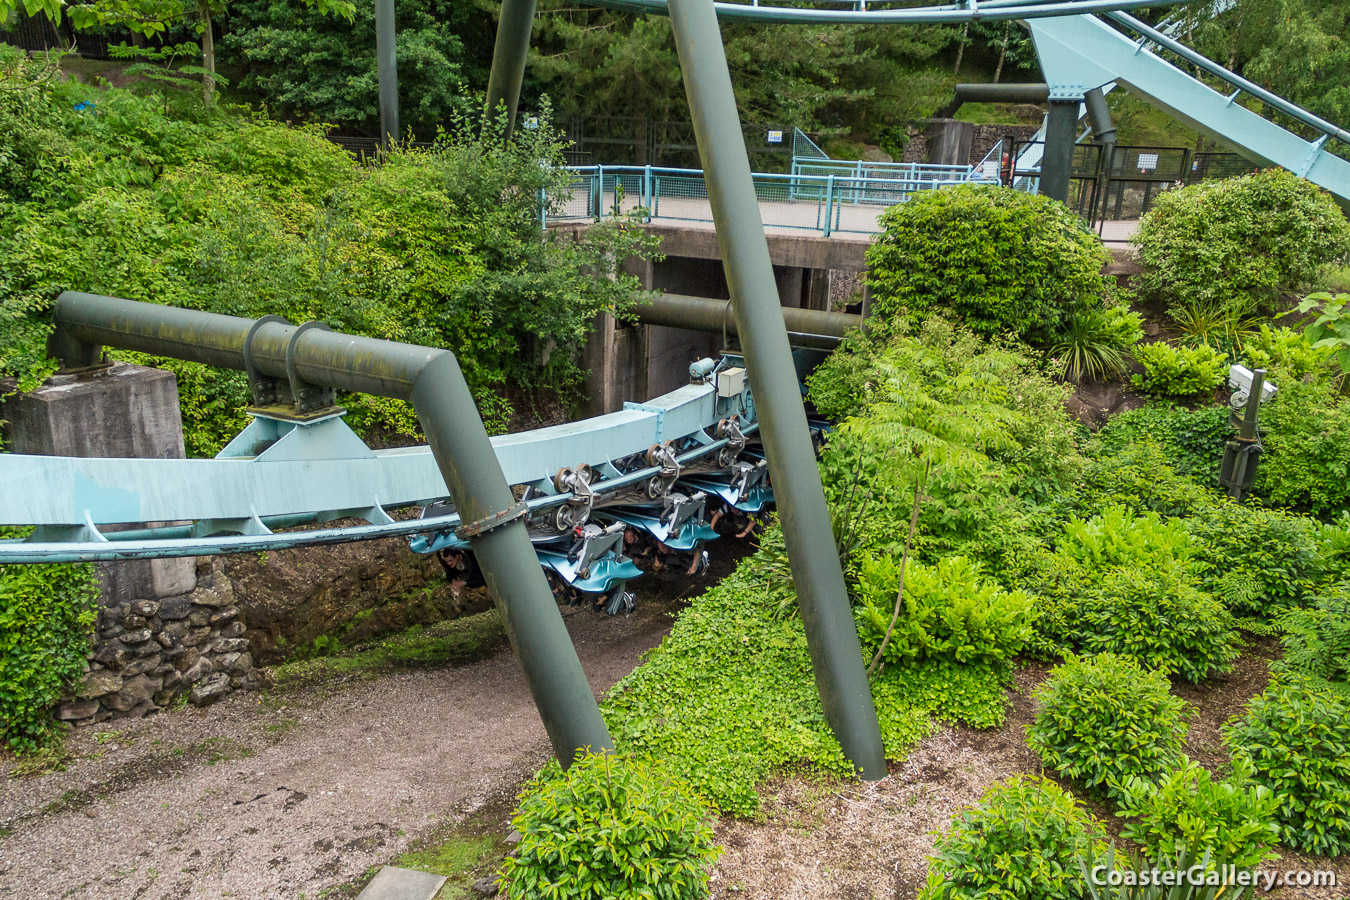 Alton Towers roller coaster going below ground level